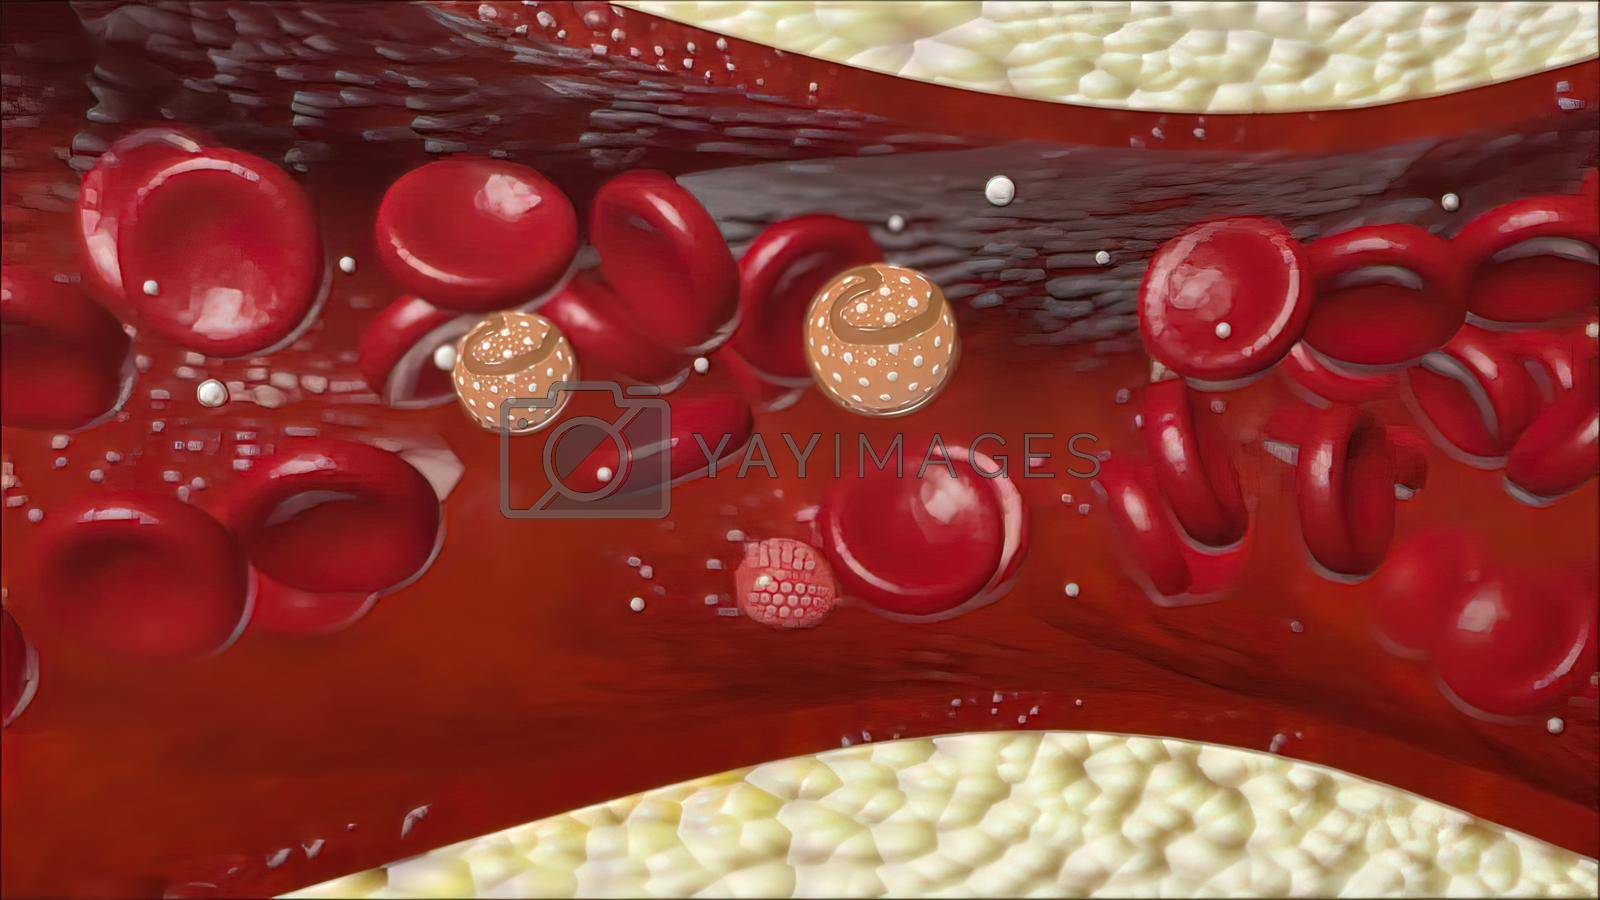 Royalty free image of Atherosclerosis with cholesterol blood or plaque in vessel cause of coronary artery disease by creativepic